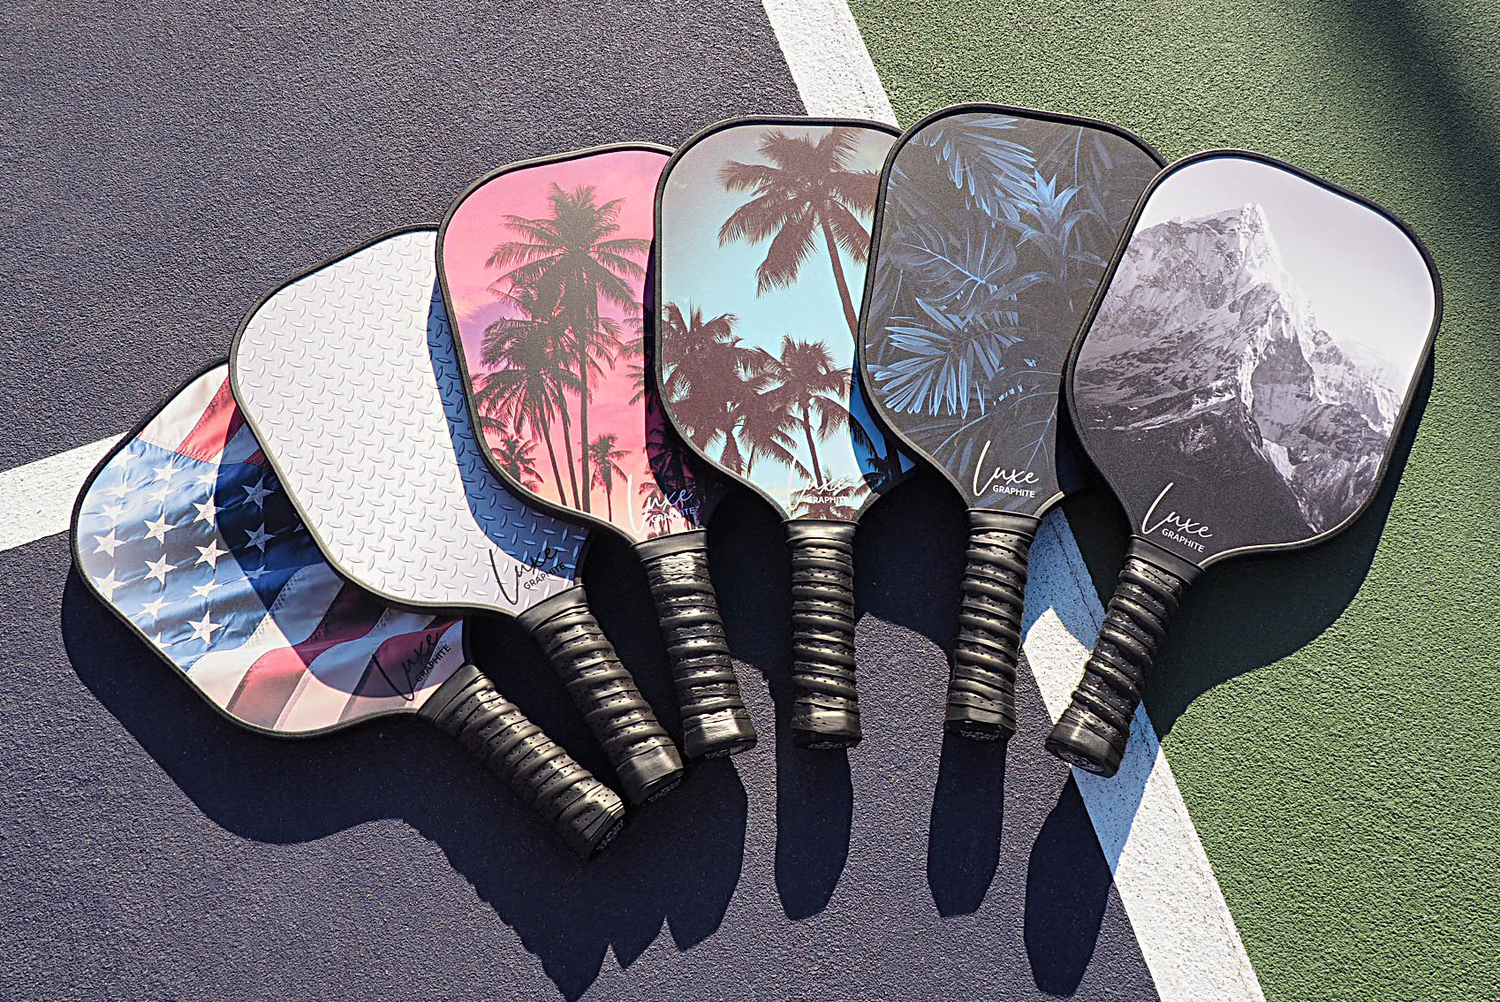 PalmsOAces carbon fiber pickleball paddles on court. Fun, colorful pickleball rackets.